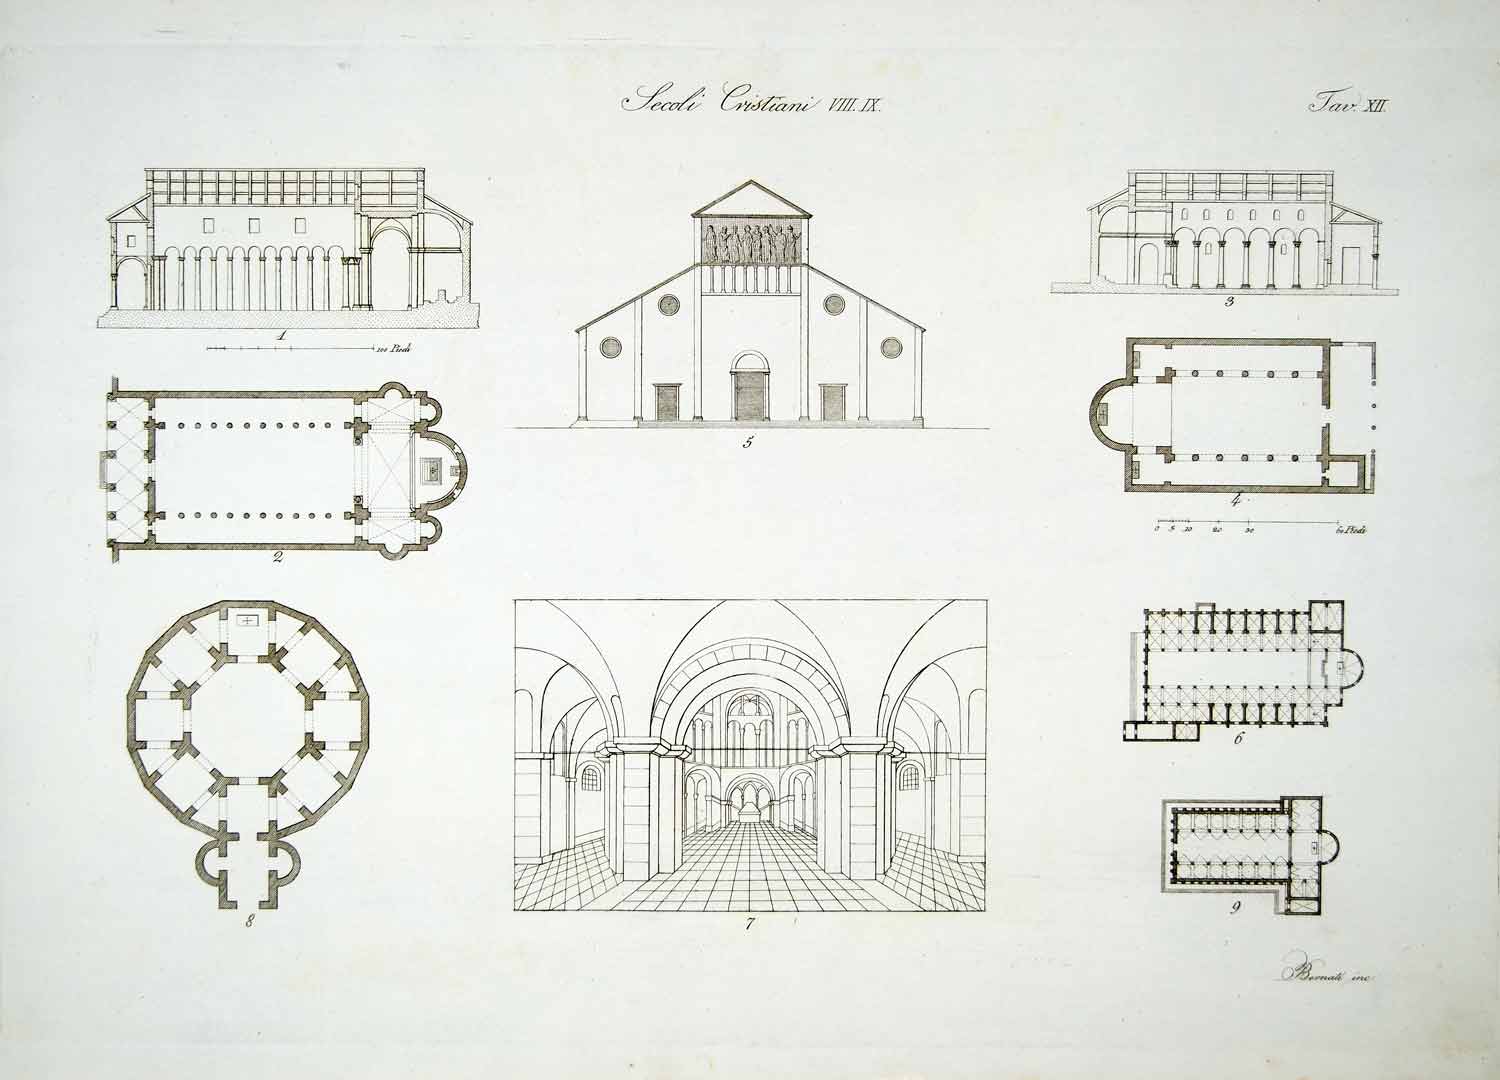 1834 Copper Engraving Lucca Italy Rome Church Architectural Elevation Plans ILC2